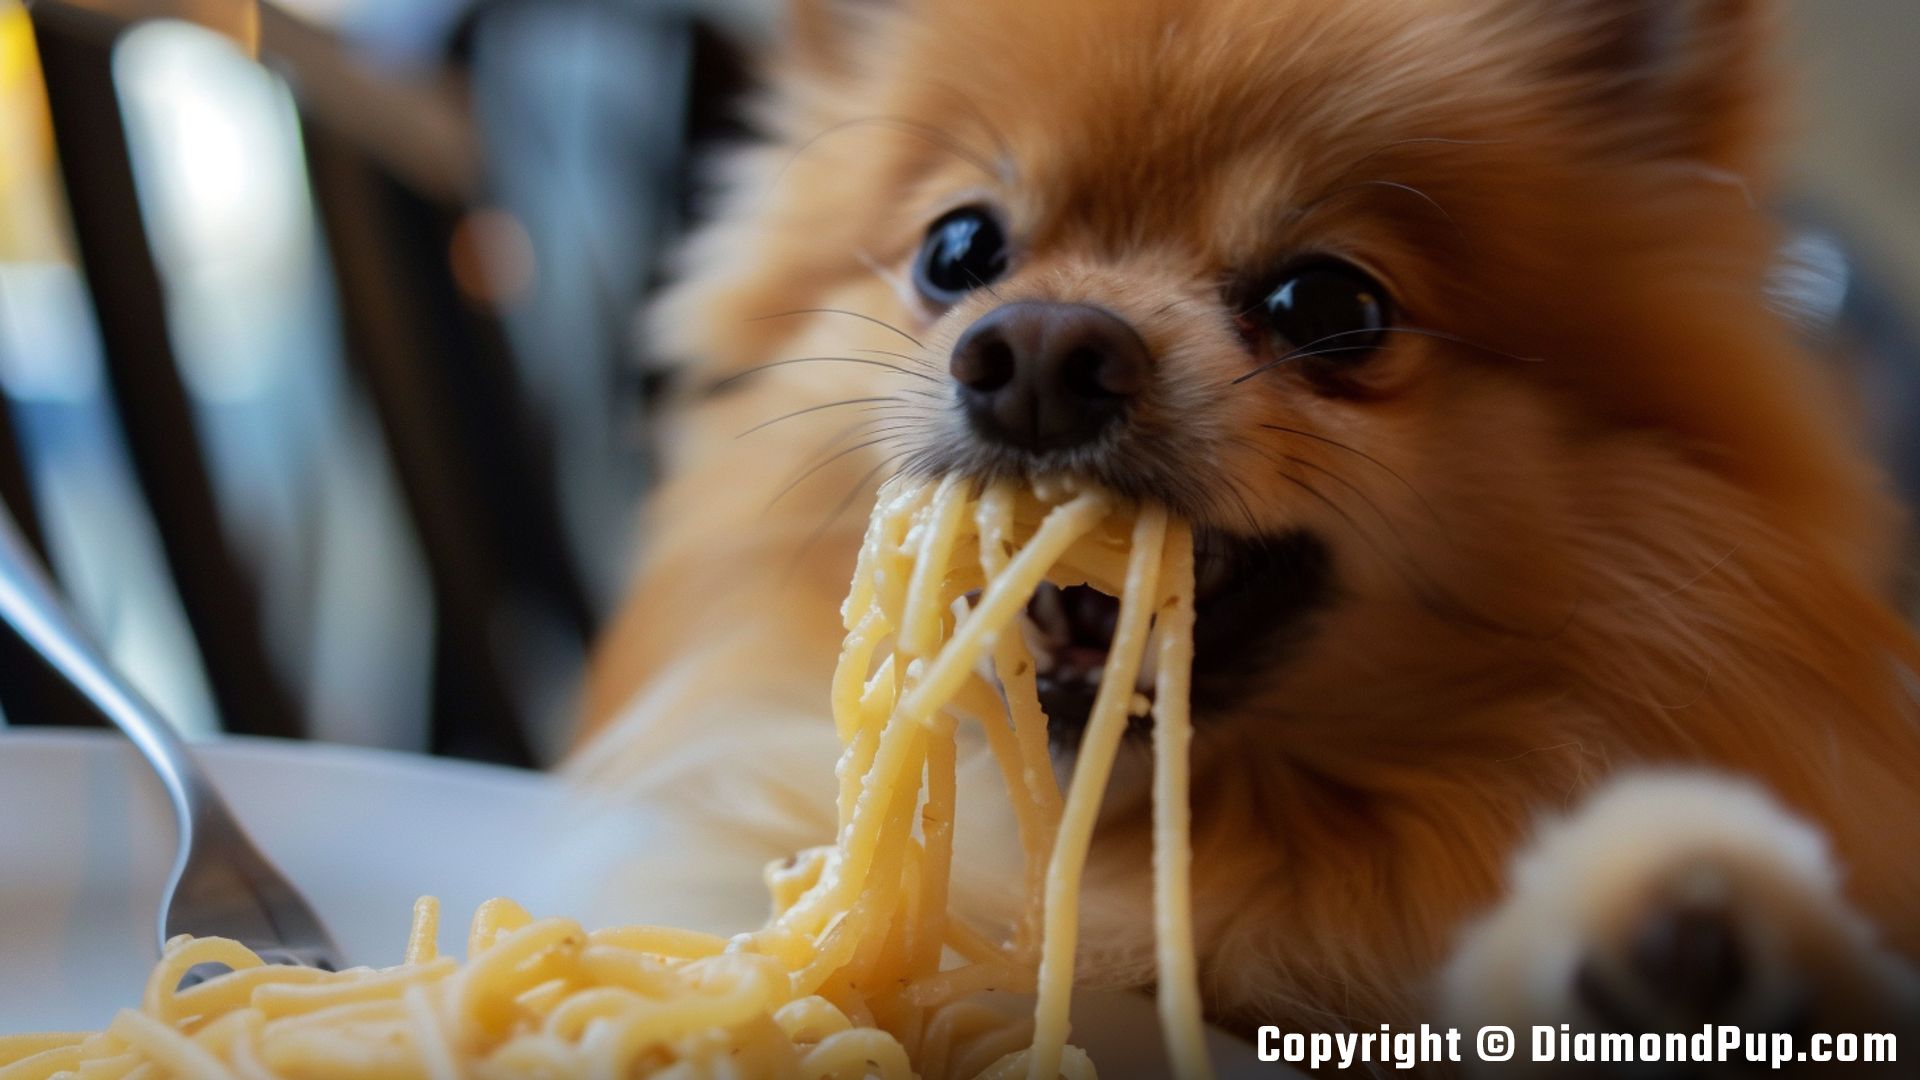 Image of a Cute Pomeranian Snacking on Pasta